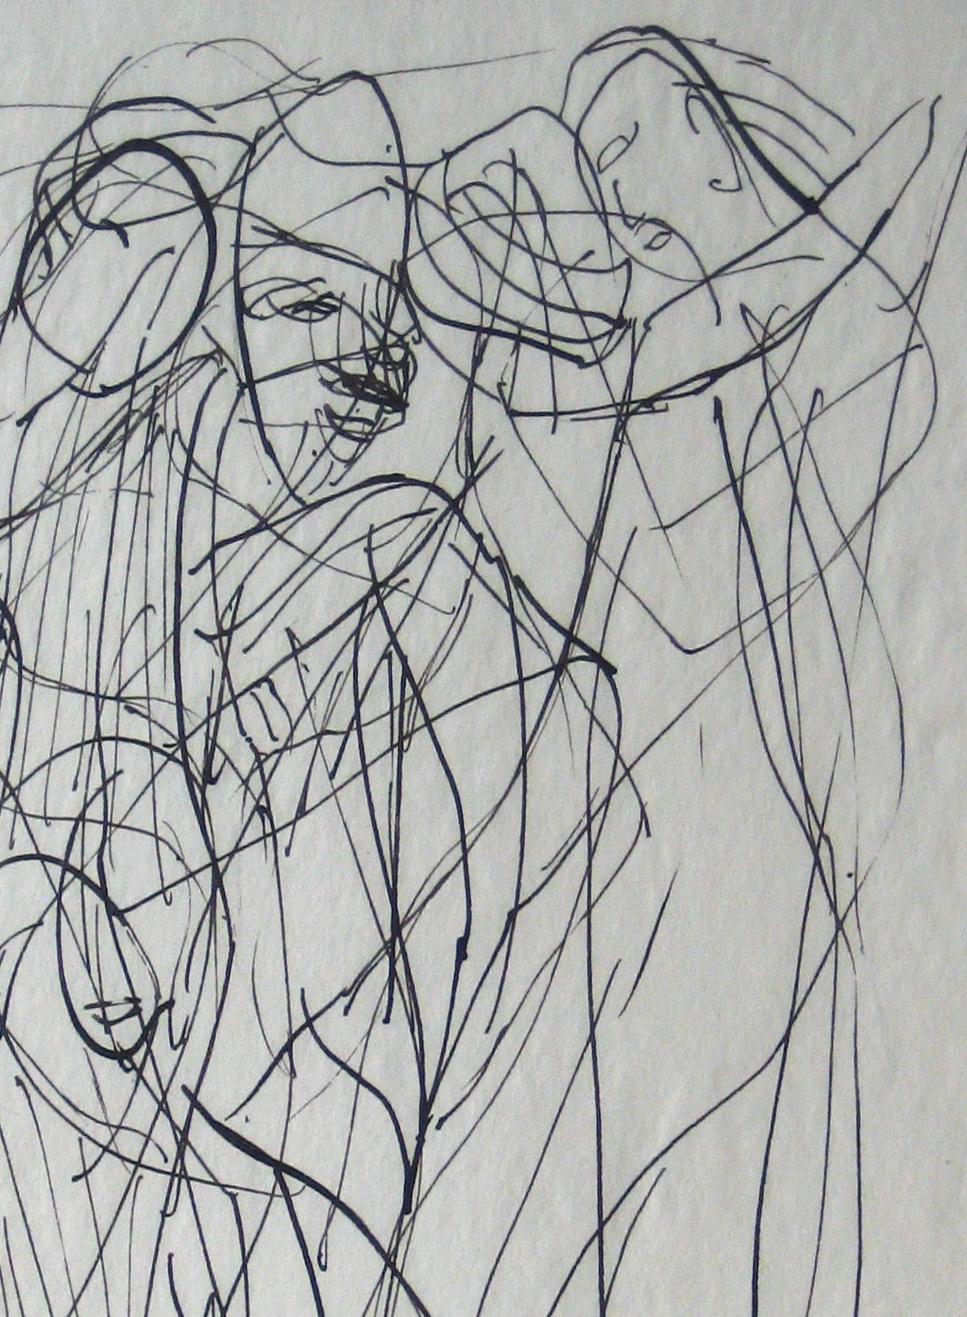 Abstracted Figures in a Scene Early 20th Century Ink on Paper - Art by Jennings Tofel